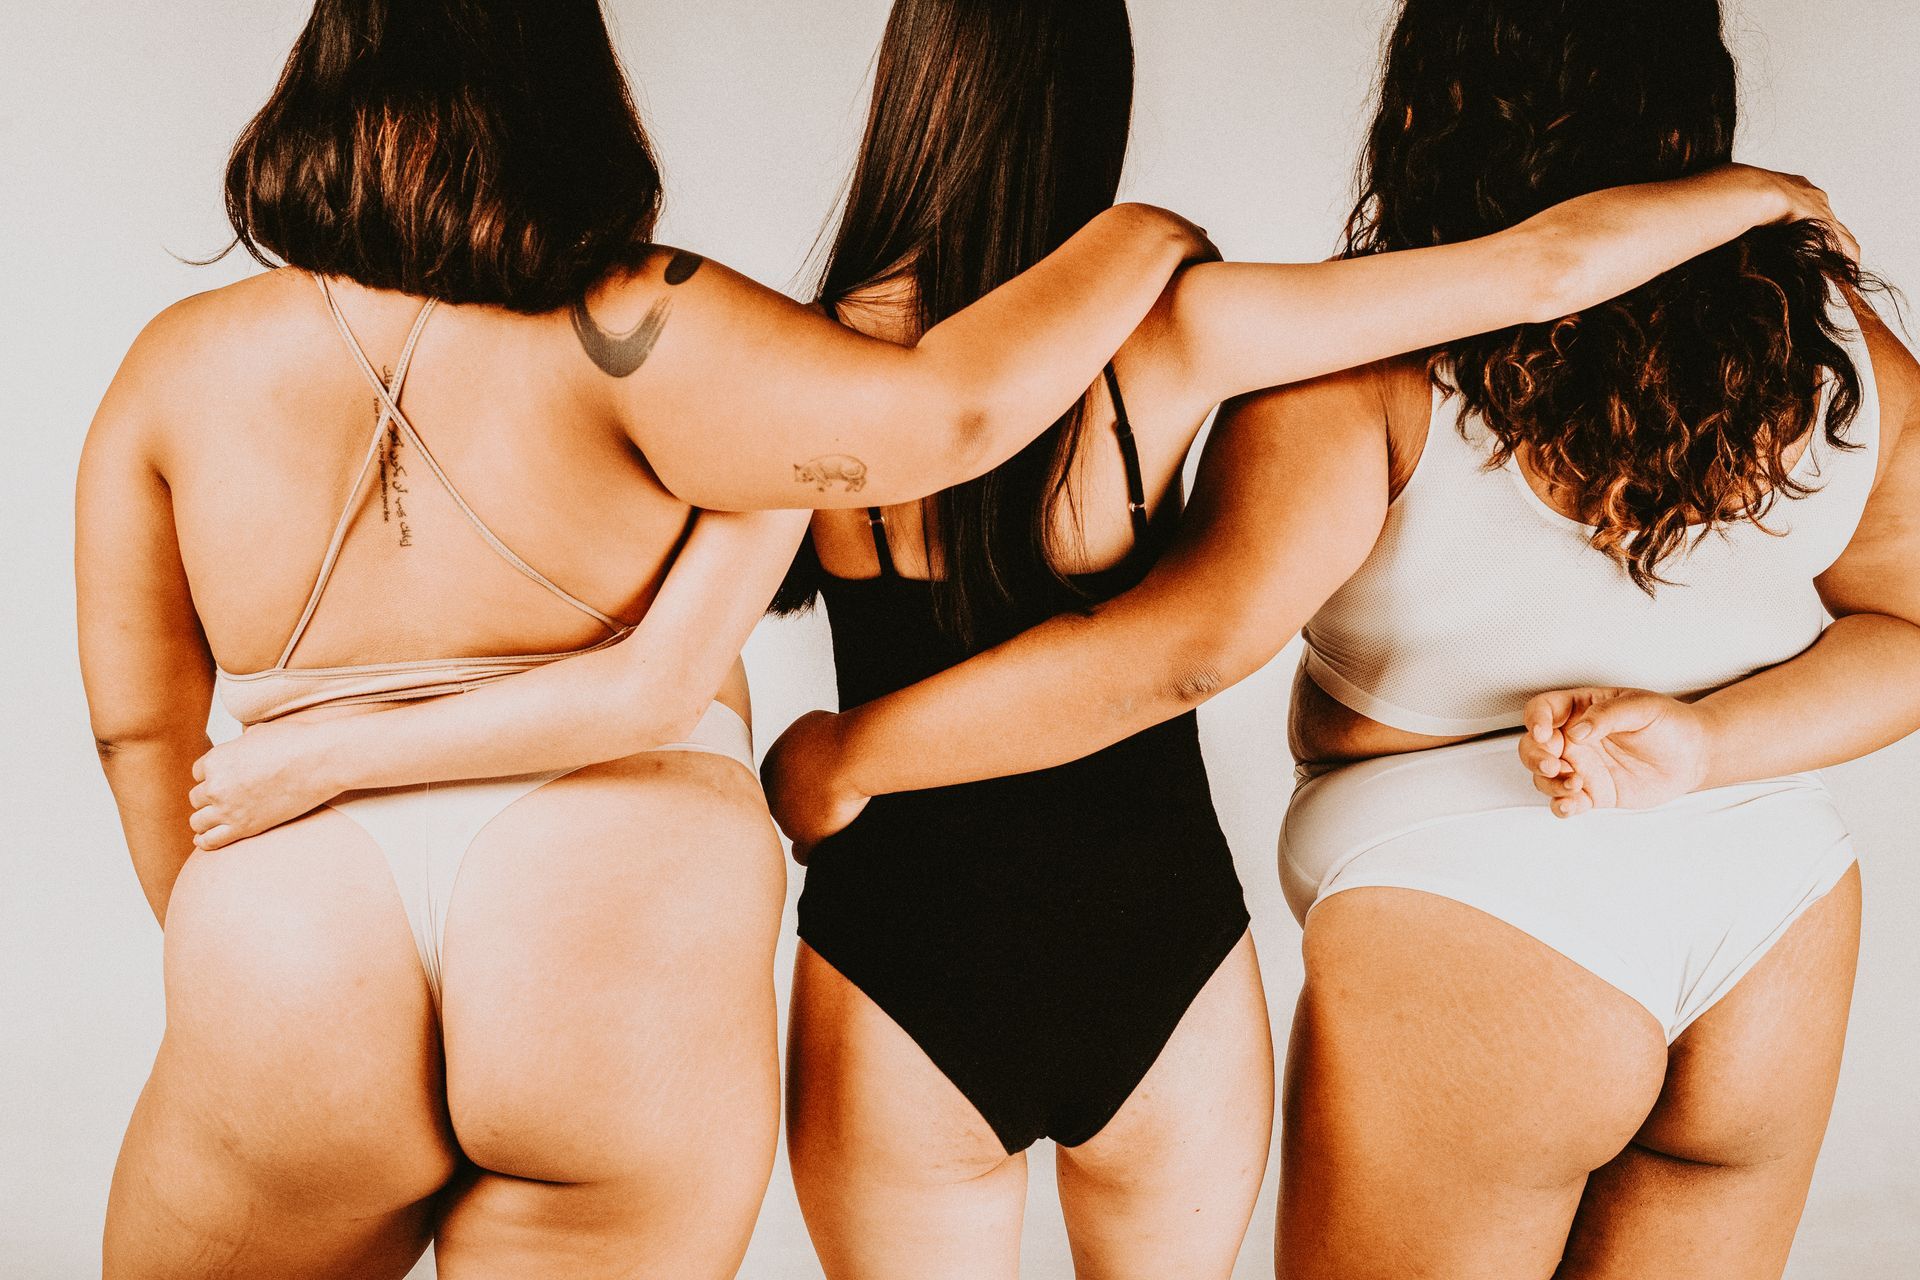 Women with different body types standing together